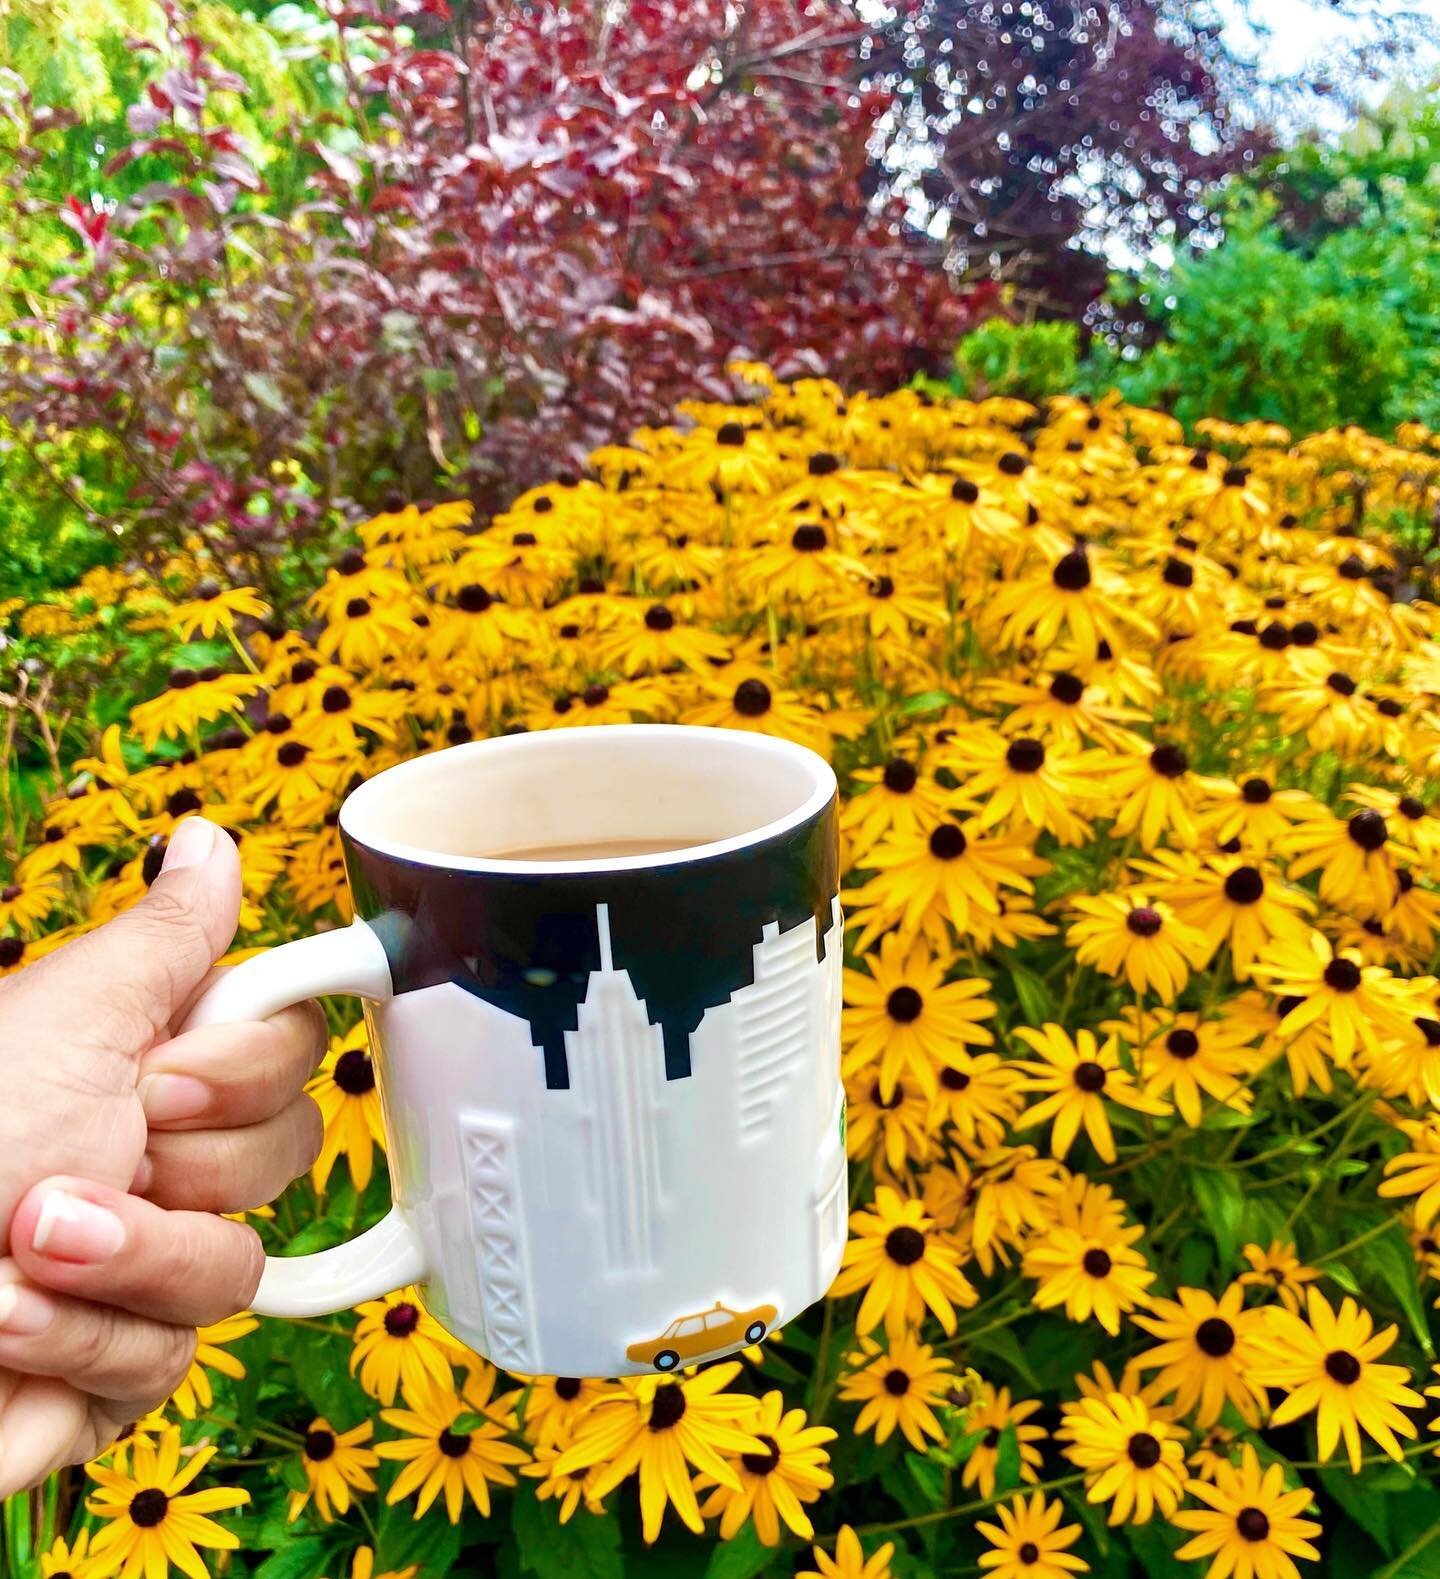 From yellow cabs 🚕 thru Central Park in NYC to morning ☕️ with my yellow flowers 🌼 in the country.

From working for others to working for myself, I cherish 🙏🏻 all parts of my journey. 

✍🏽 To learn more about my journey &amp; what I&rsquo;ve le